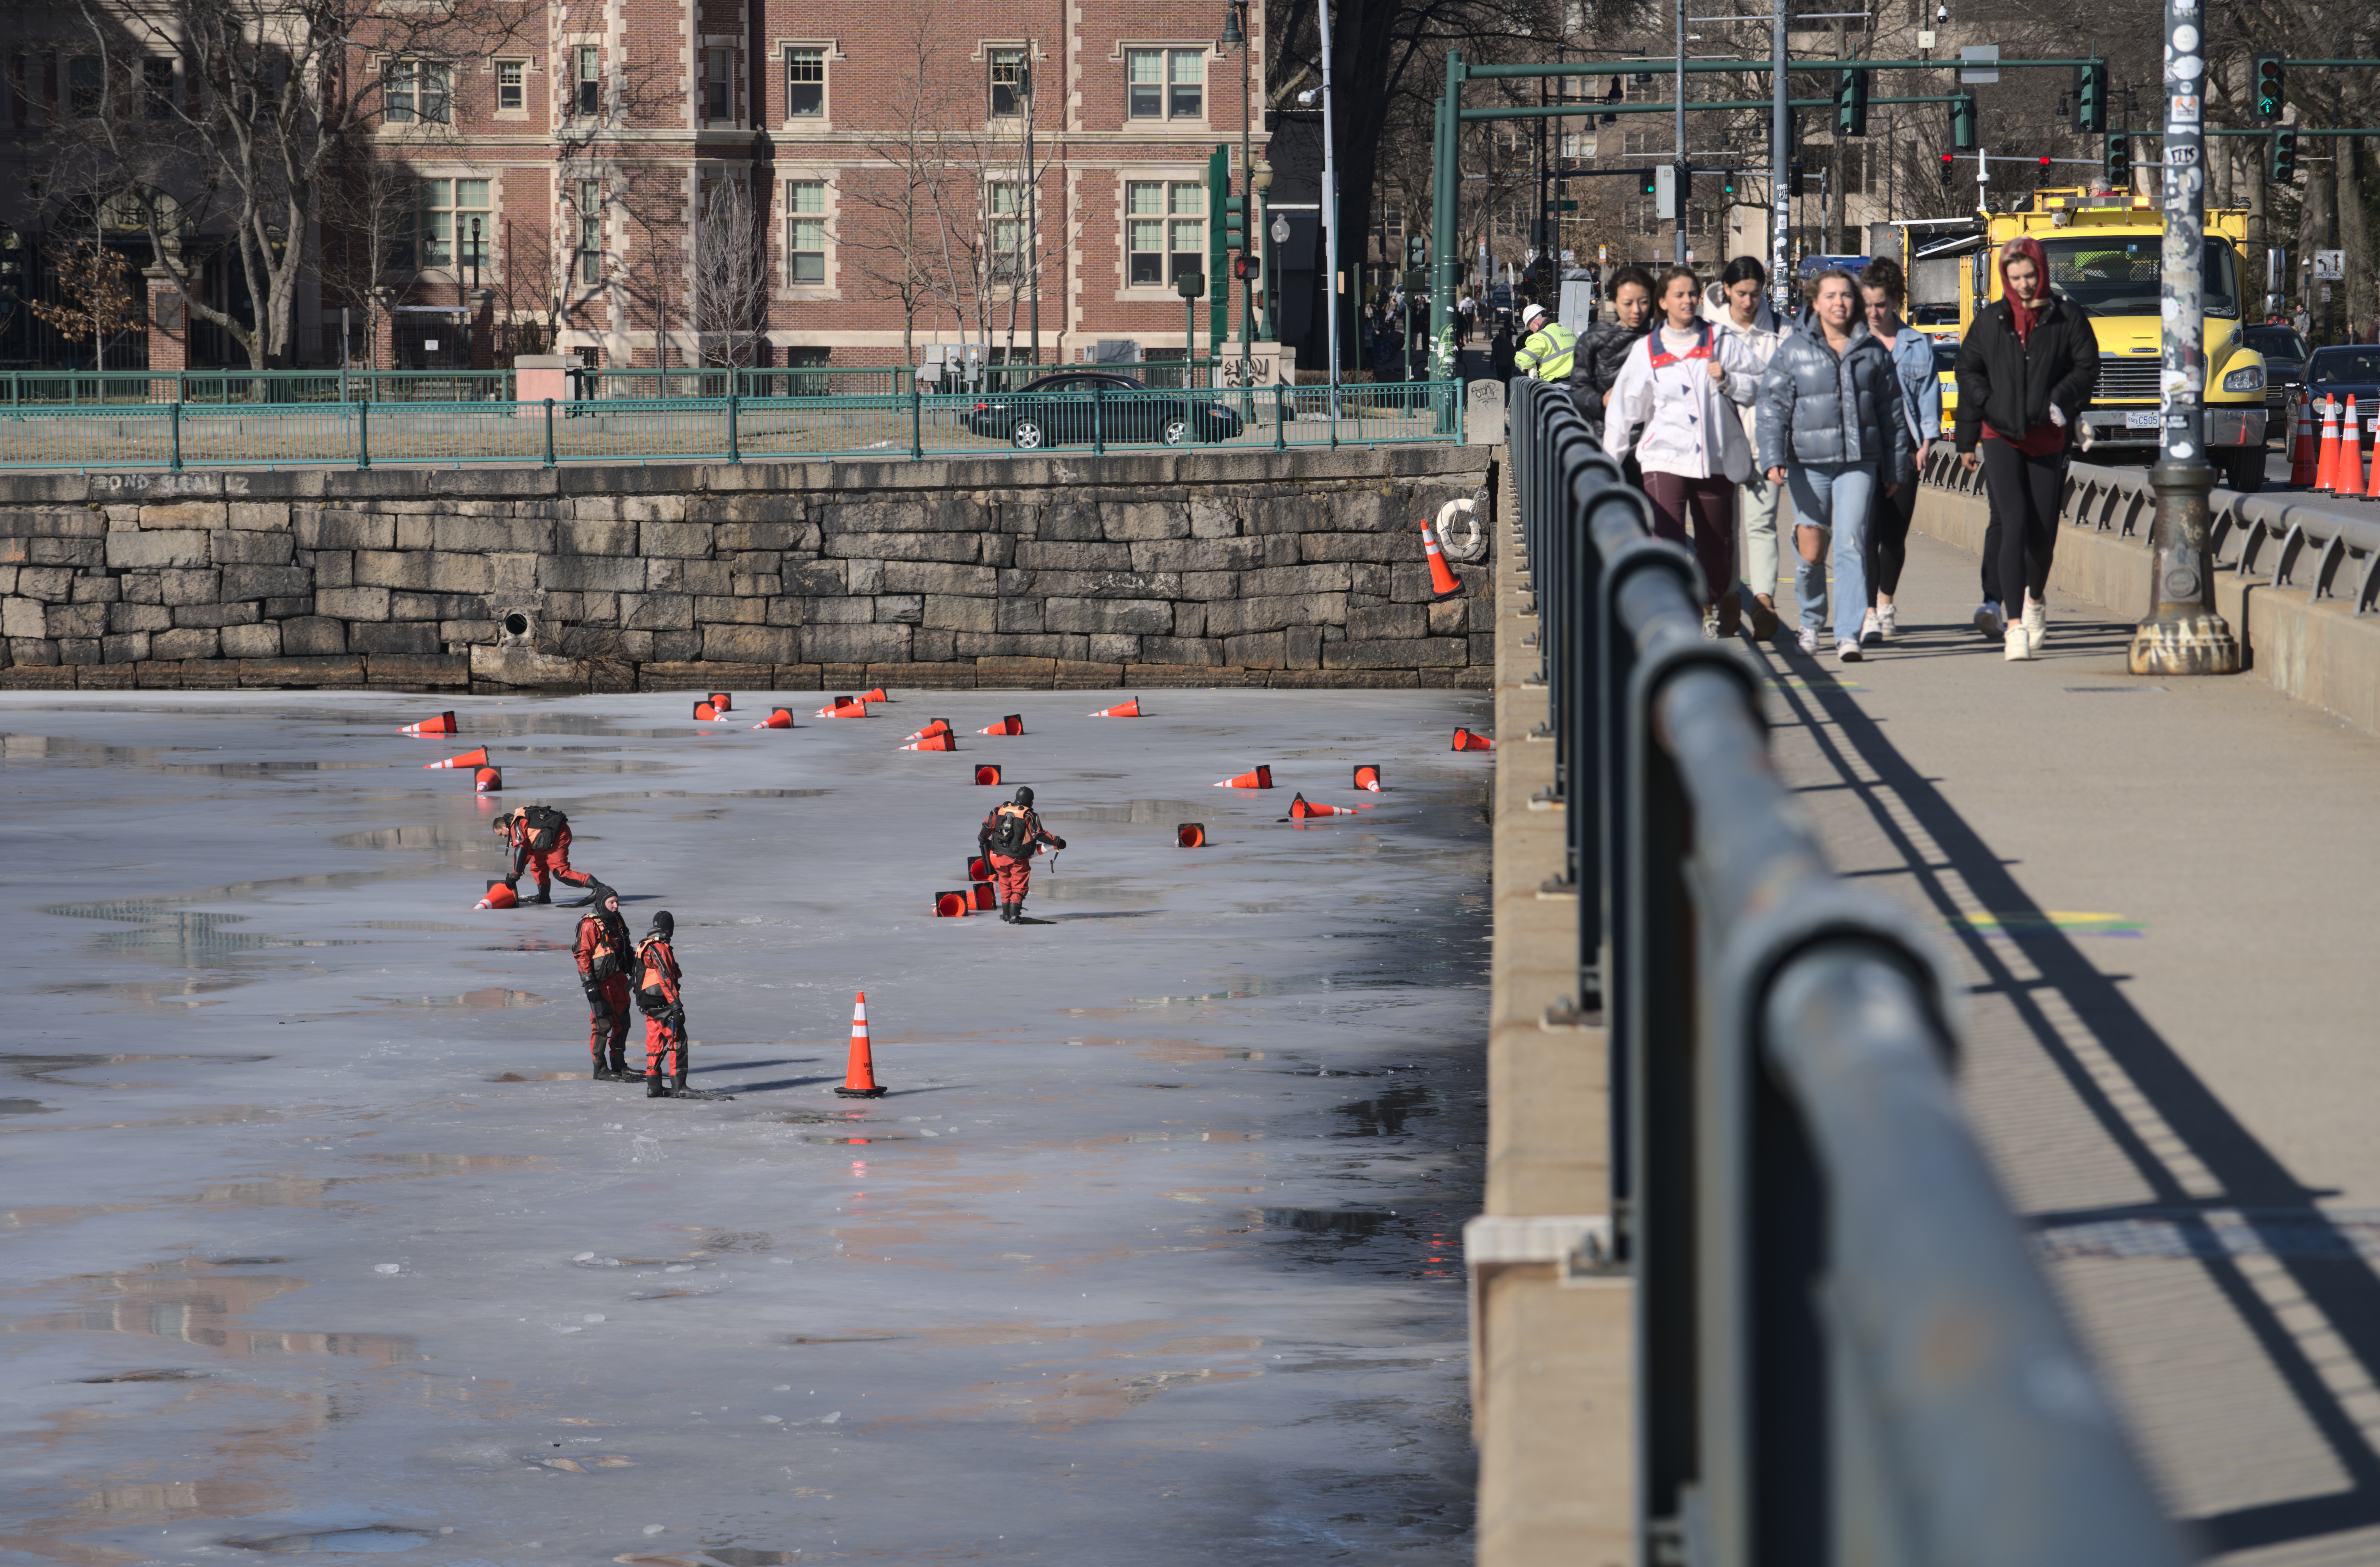 Workers in SCUBA gear retrieve cones from the frozen Charles River in January 2022.